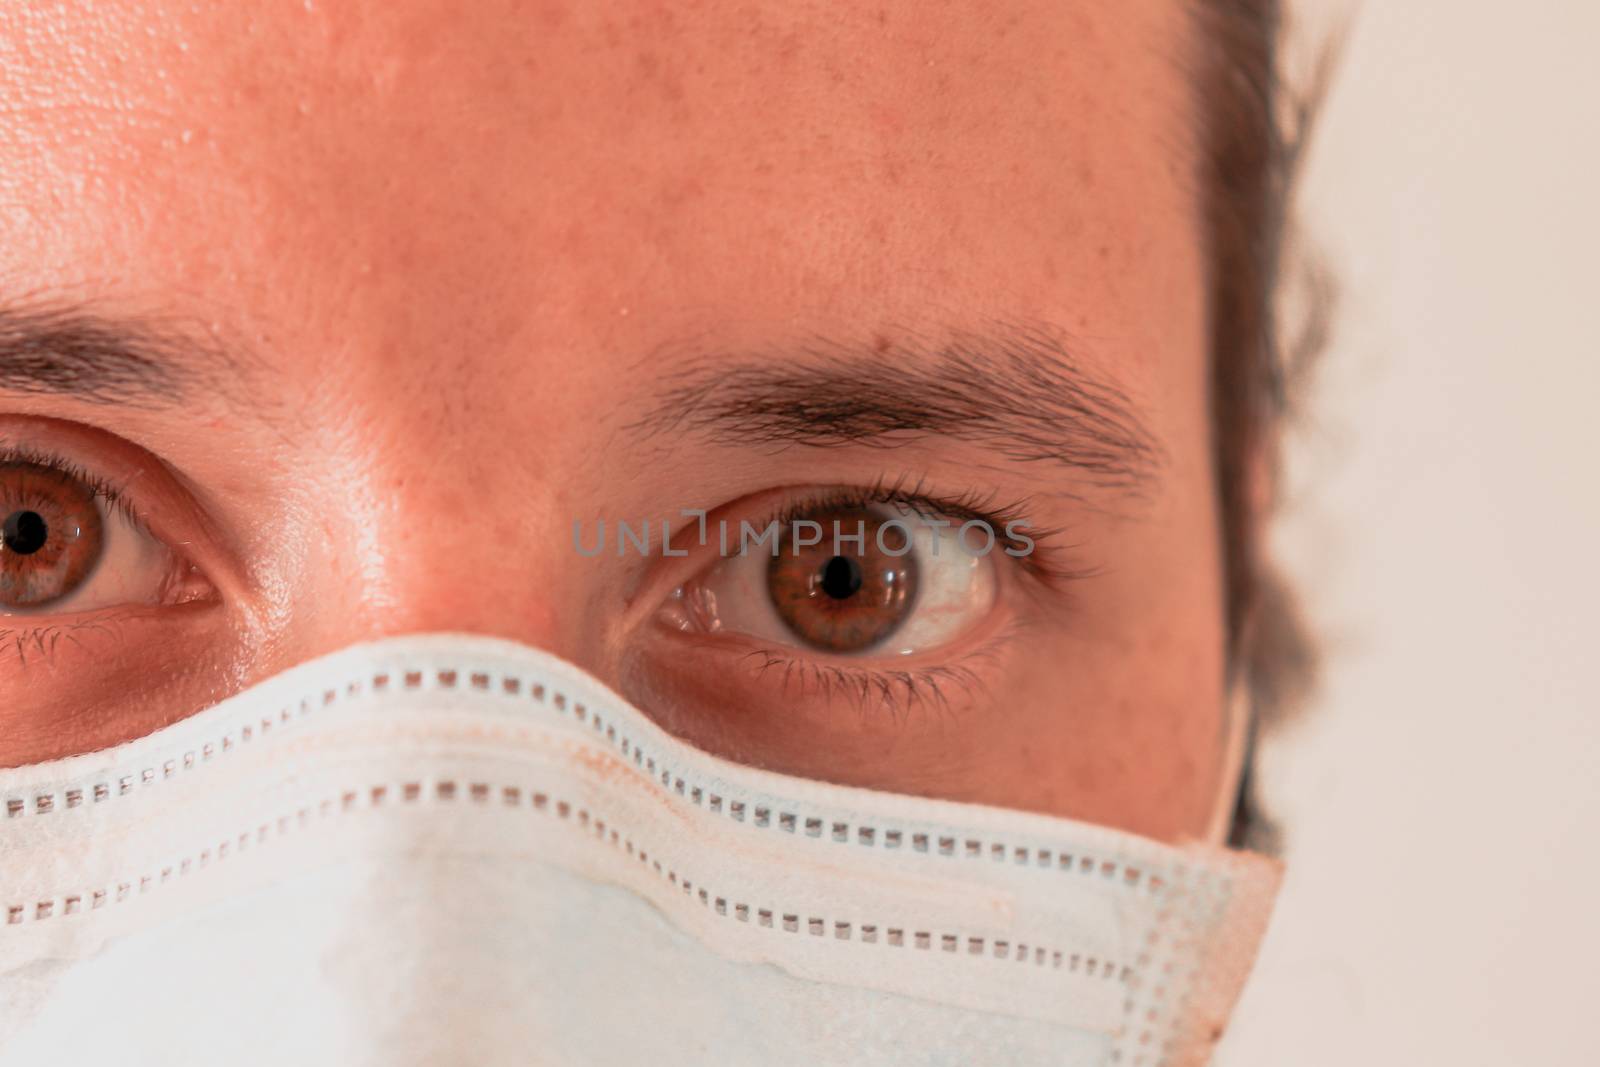 Portrait of a man wearing a surgical mask by Sonnet15